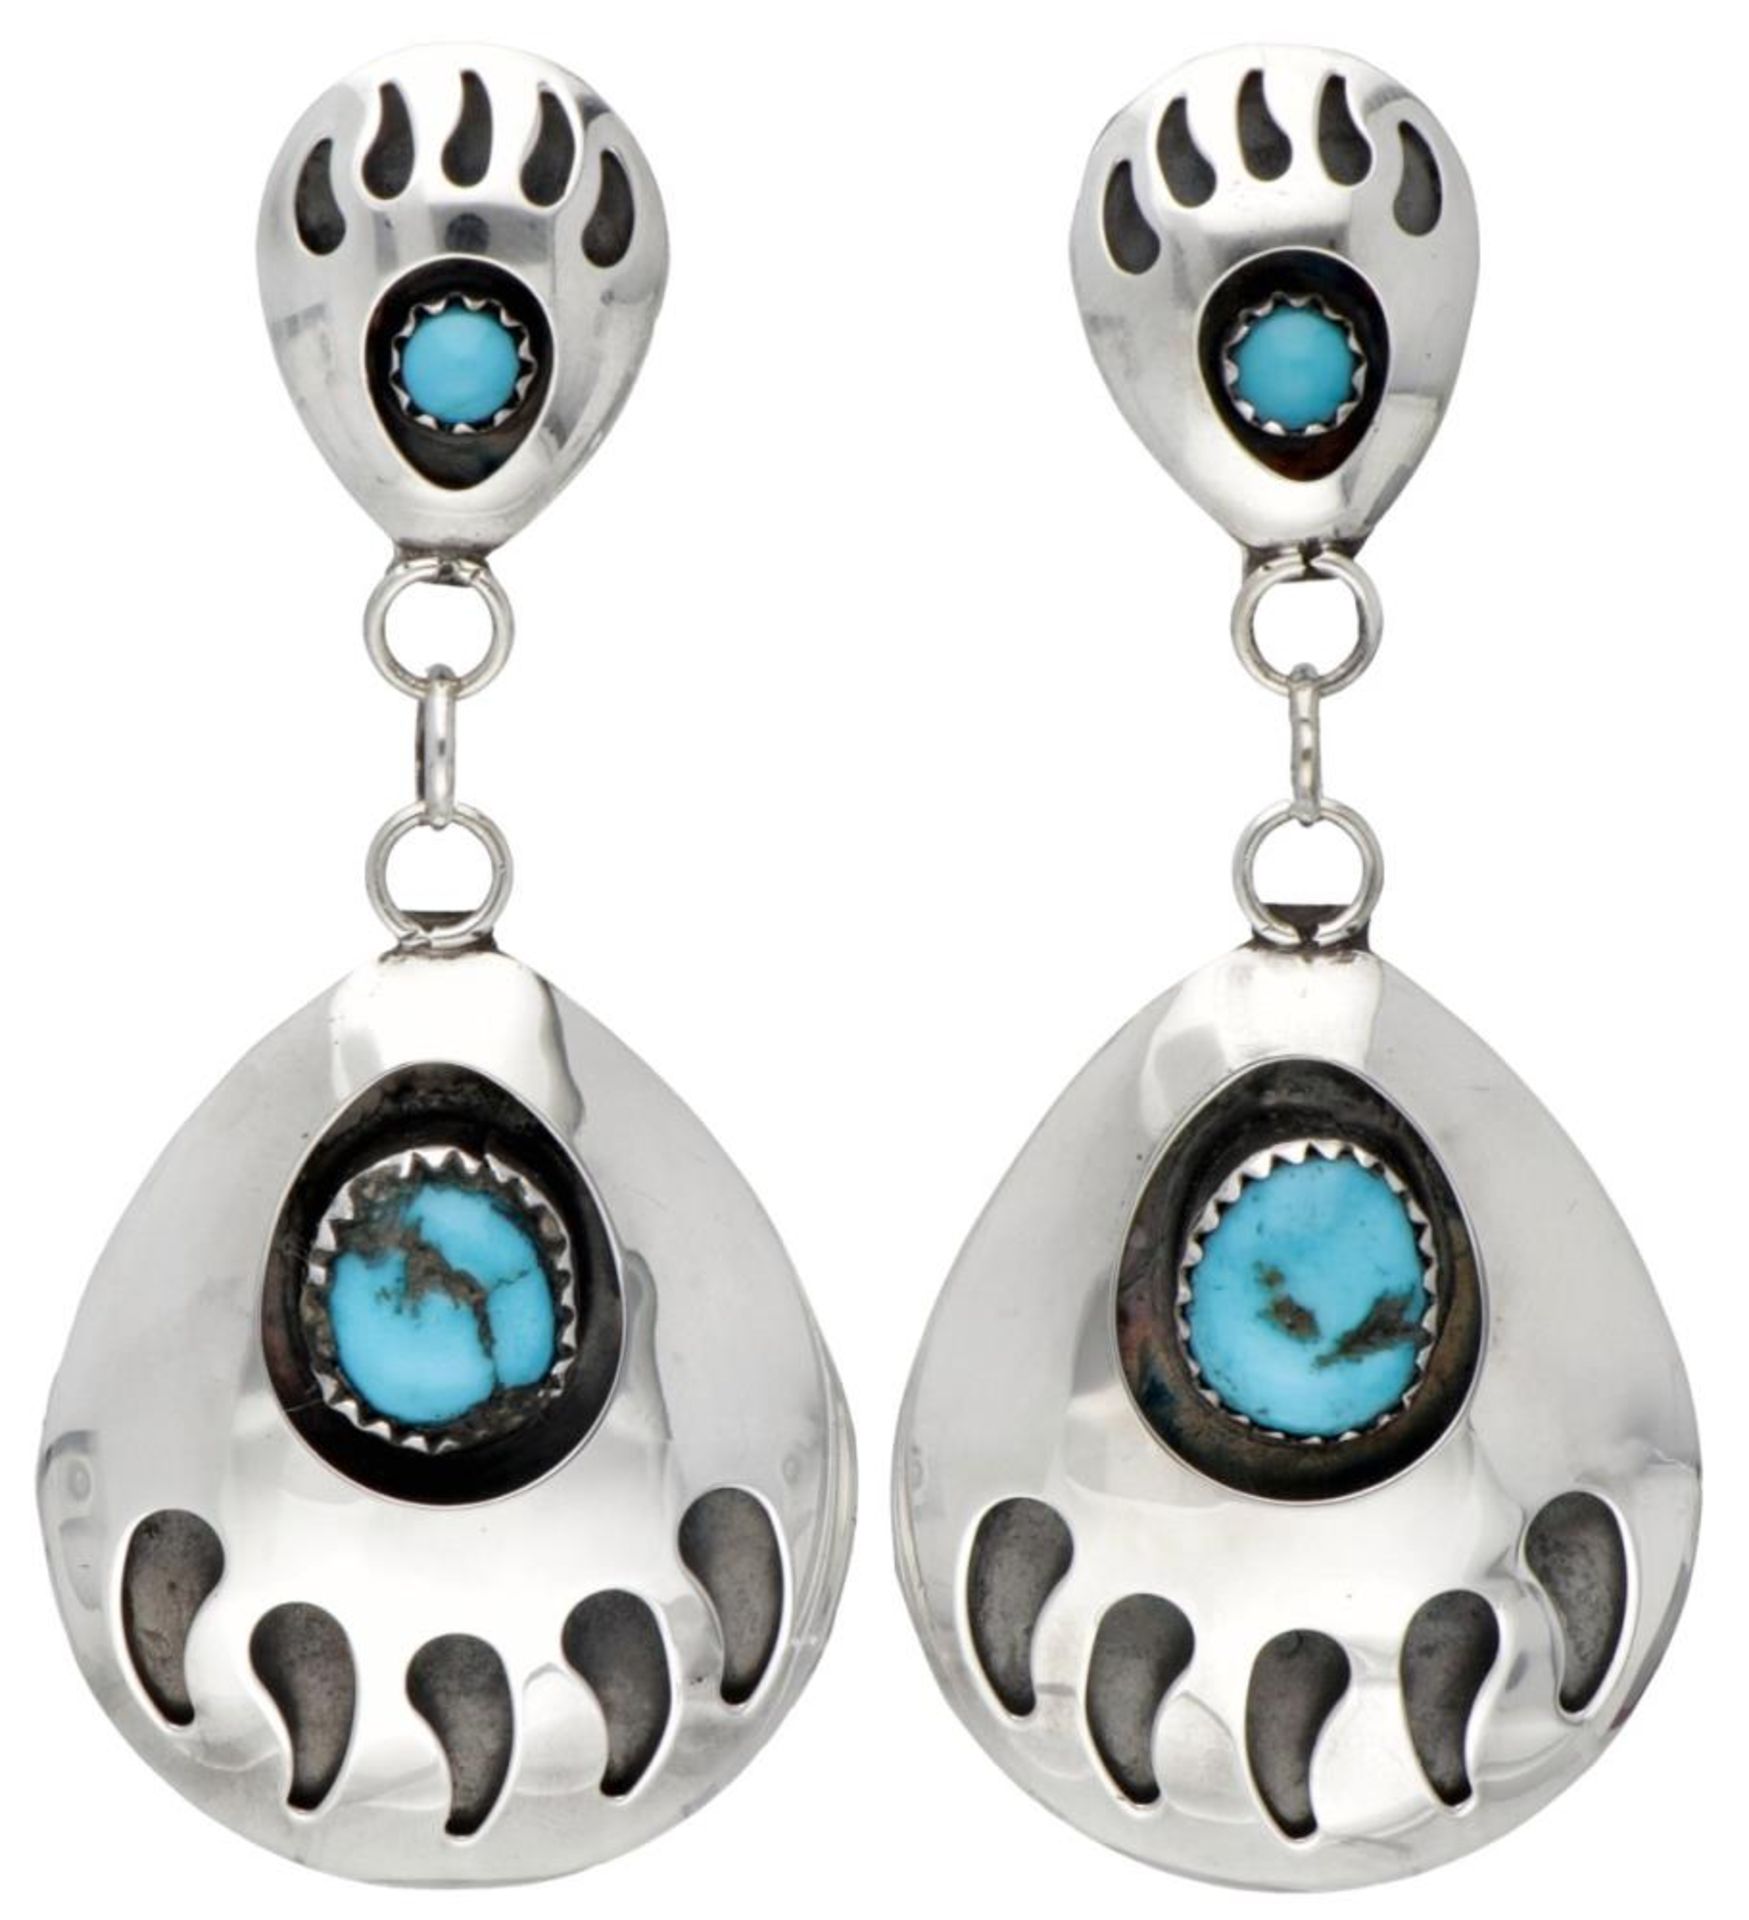 Selena Jake 'Bear claw' Navajo sterling silver Native American earrings set with turquoise. - Image 2 of 6